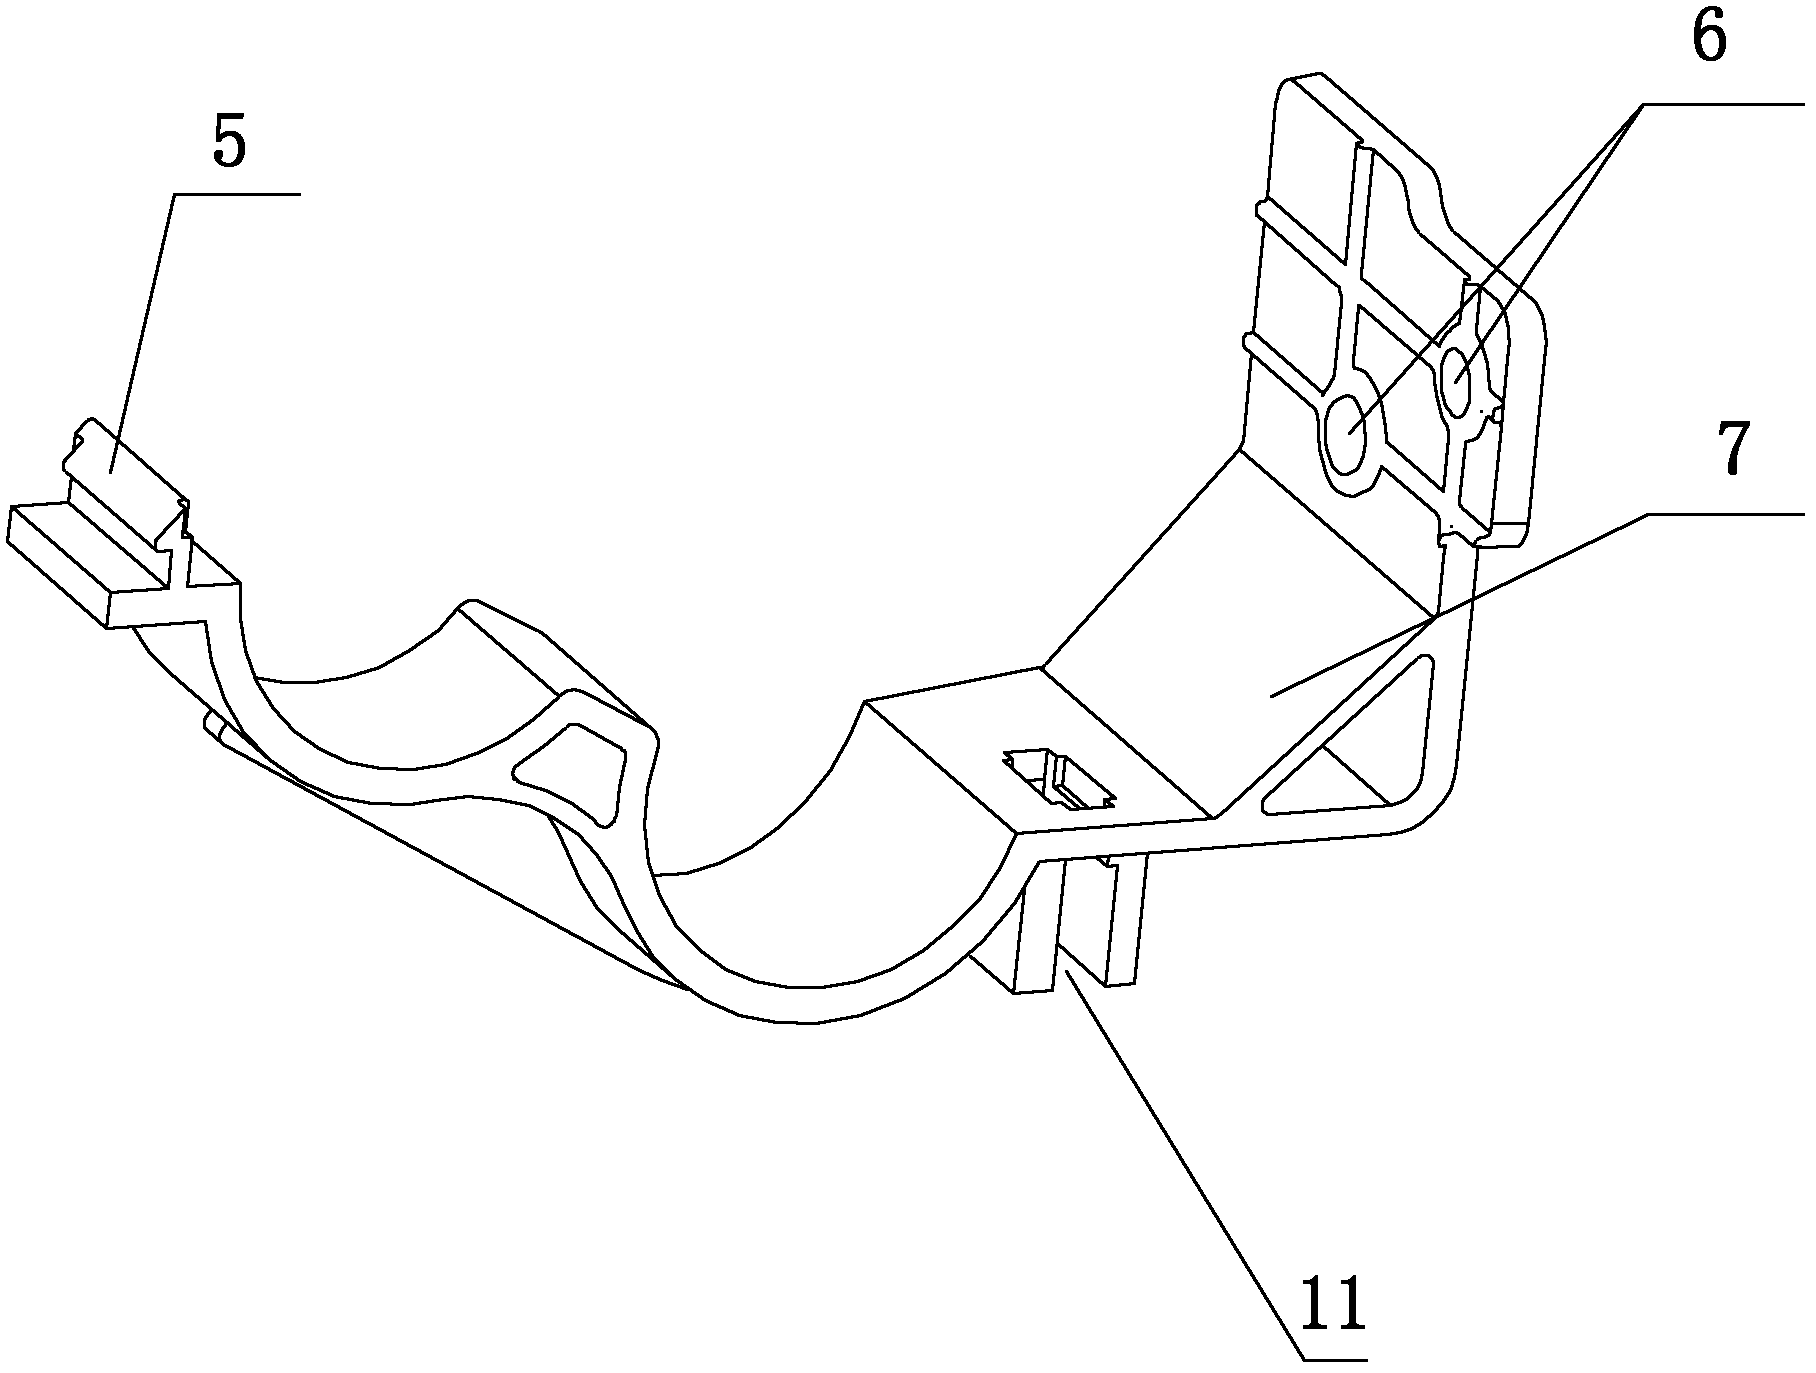 Pipe fixing device with multiple holes